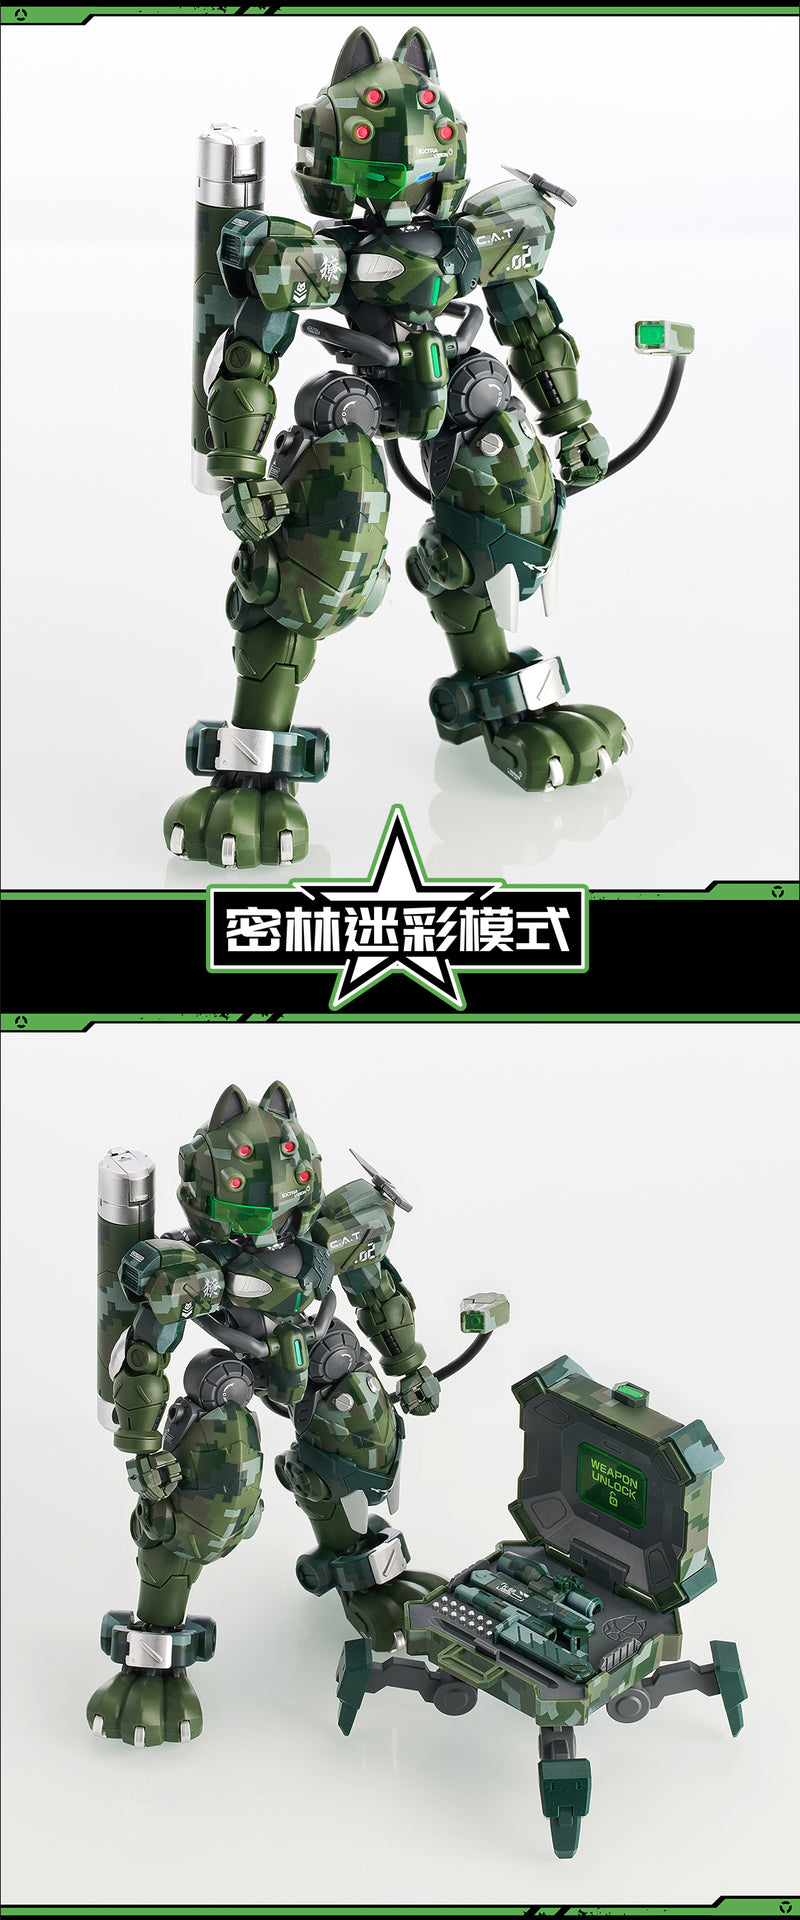 【Pre-Order】XIAOT x IRON ROARS Super-Maneuver Armored Walker C.A.T-02 "Sharp Teeth" Ryo Jungle Camouflage Limited Edition 1/60 Scale Plastic Model Kit <XIAOT>